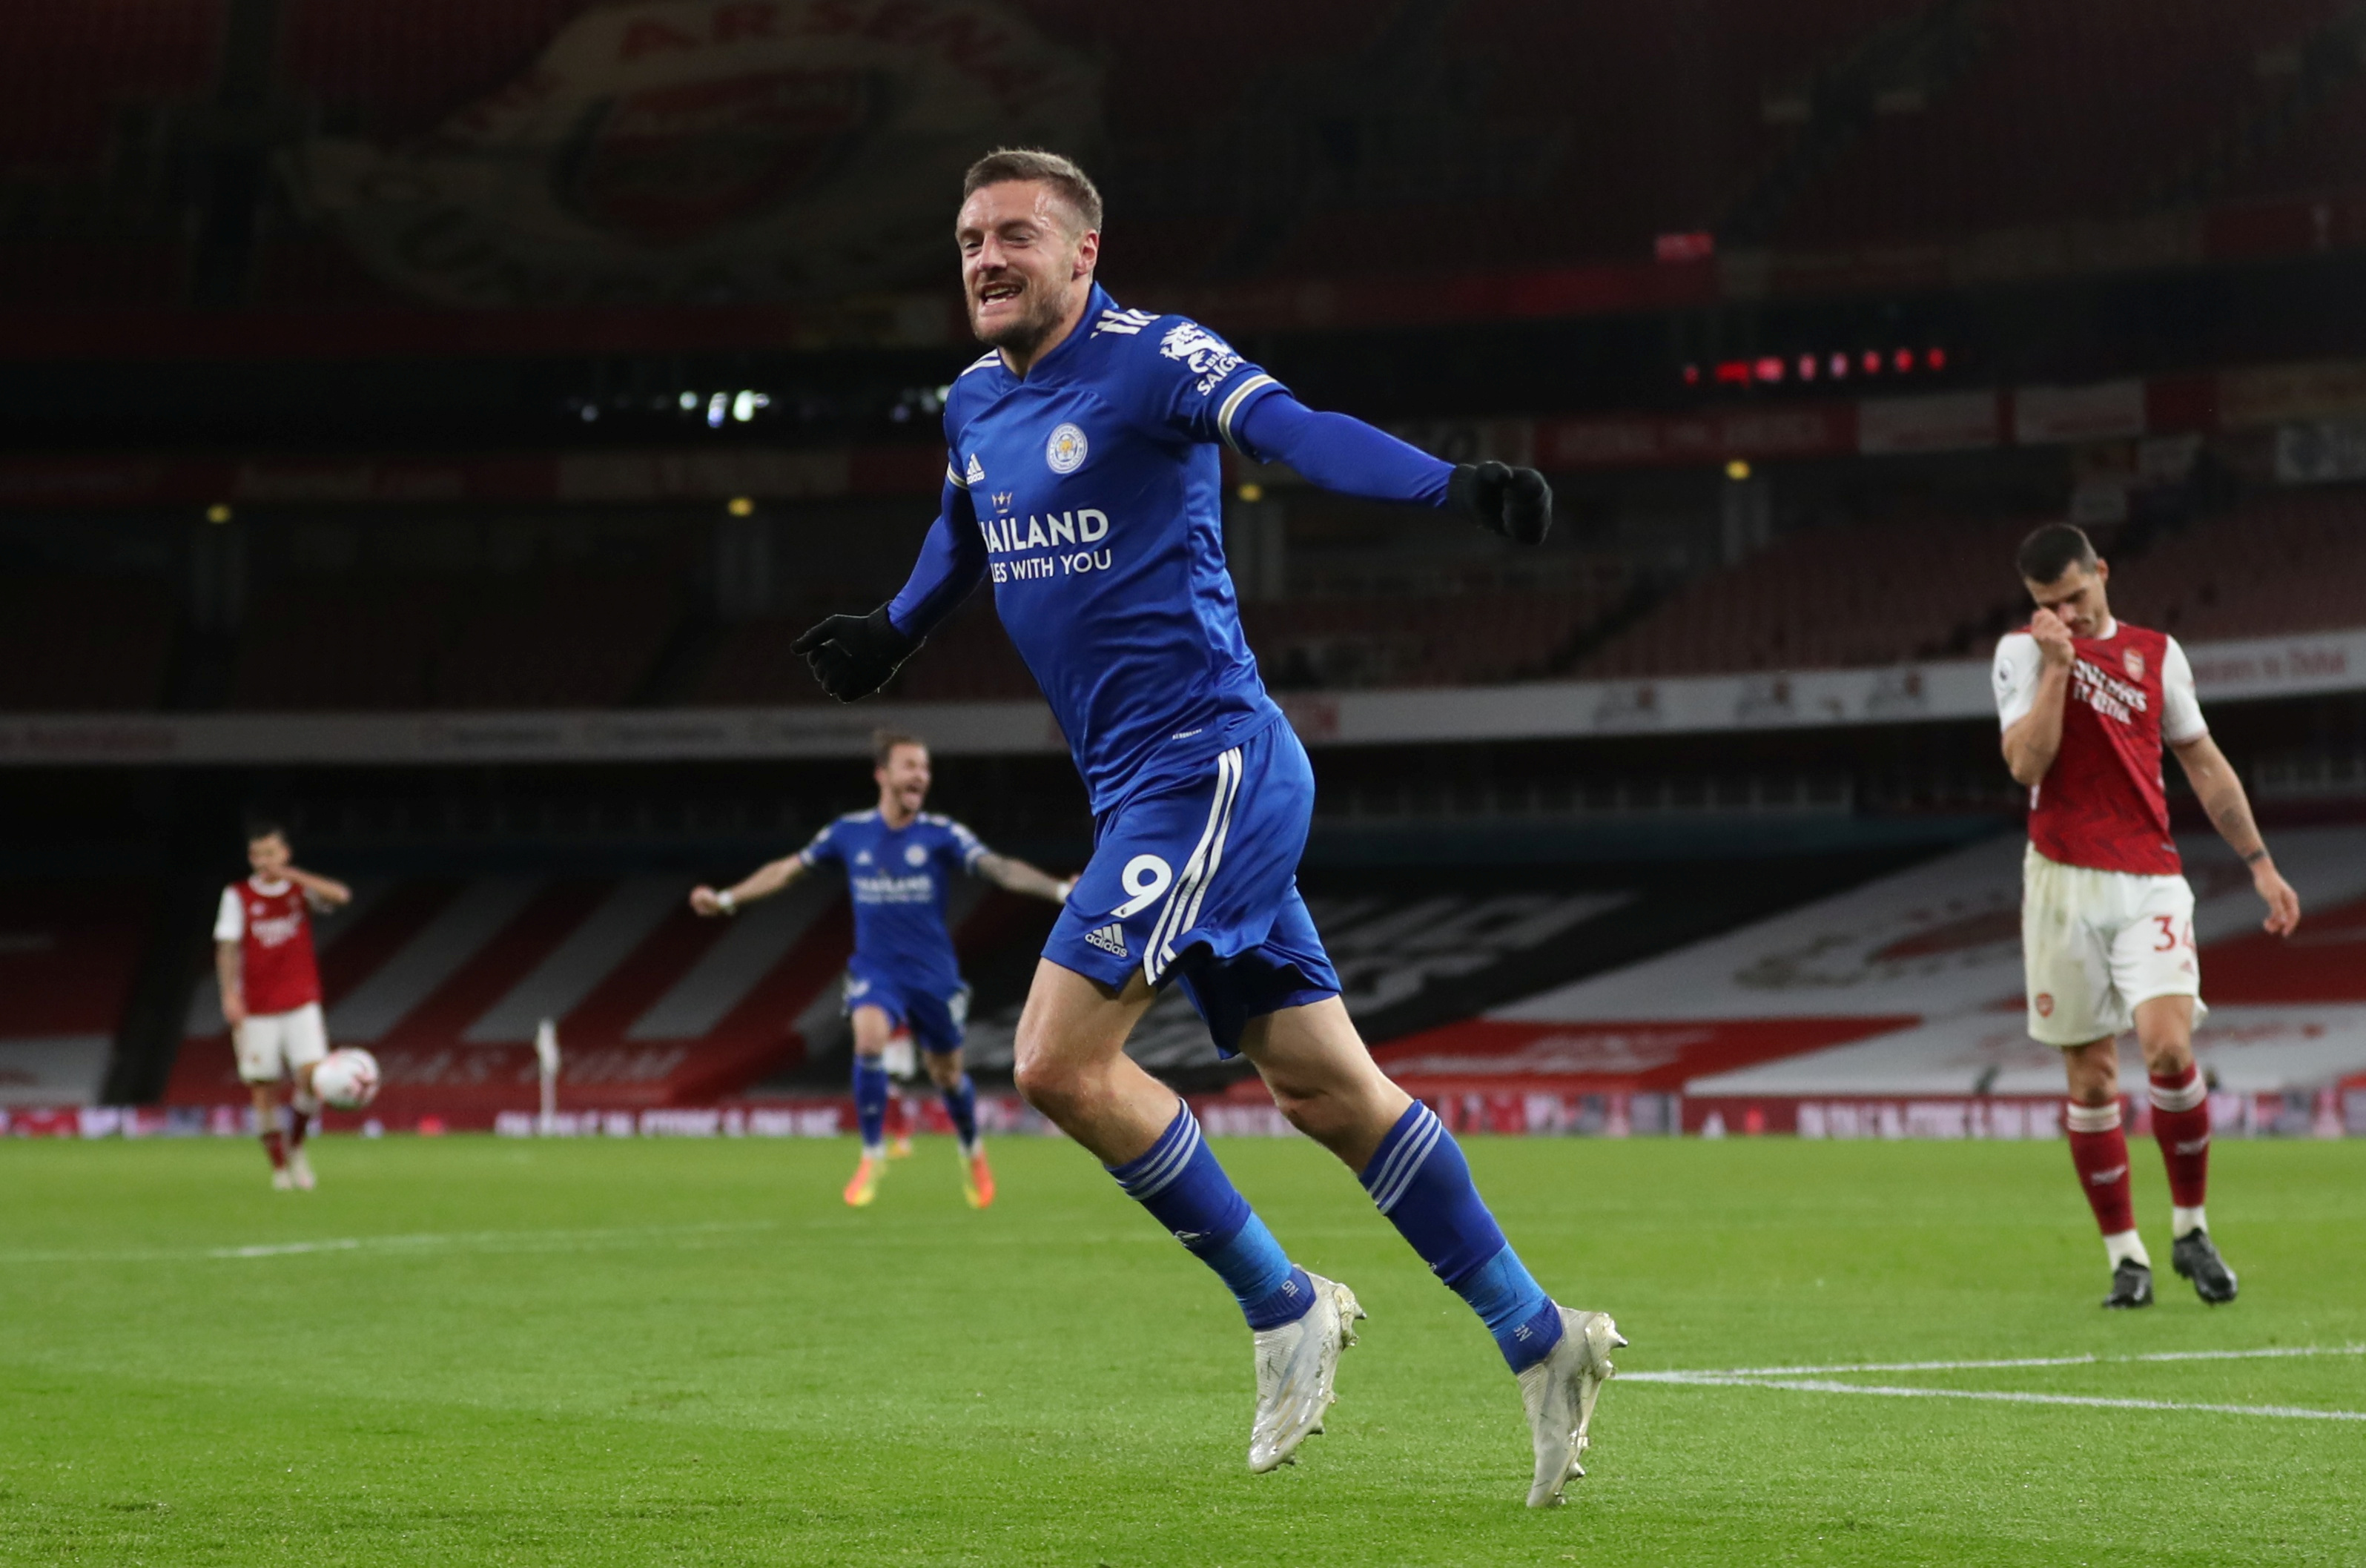 Leicester City's Jamie Vardy celebrates scoring their first goal during the Premier League match between Arsenal and Leicester City, at Emirates Stadium, in London, Britain, on October 25, 2020. Photo: Pool via Reuters